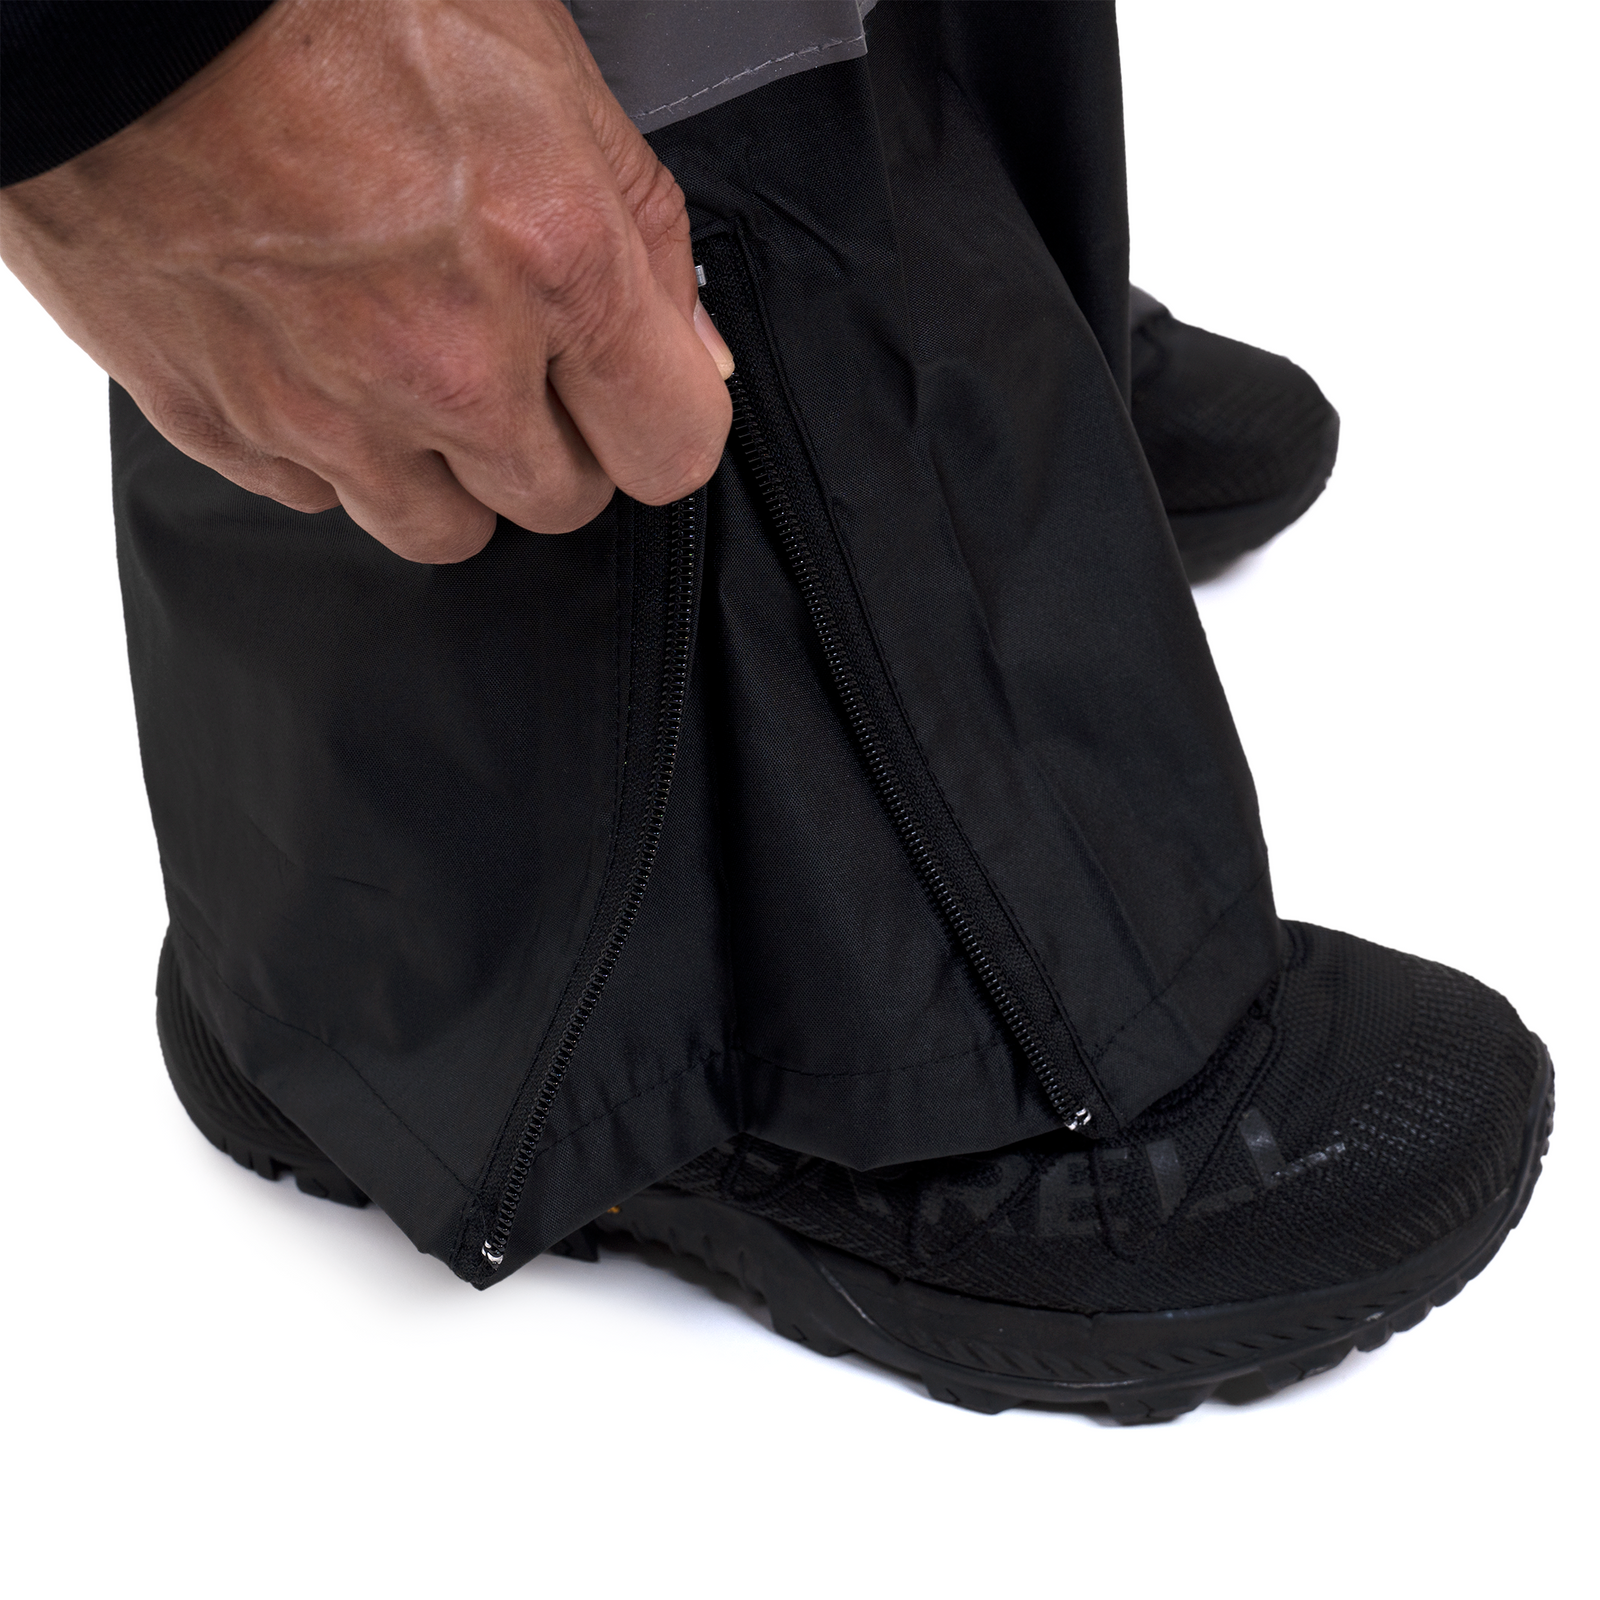 close up detail to show the zipper at boot level of the rain pants to expand the boot section